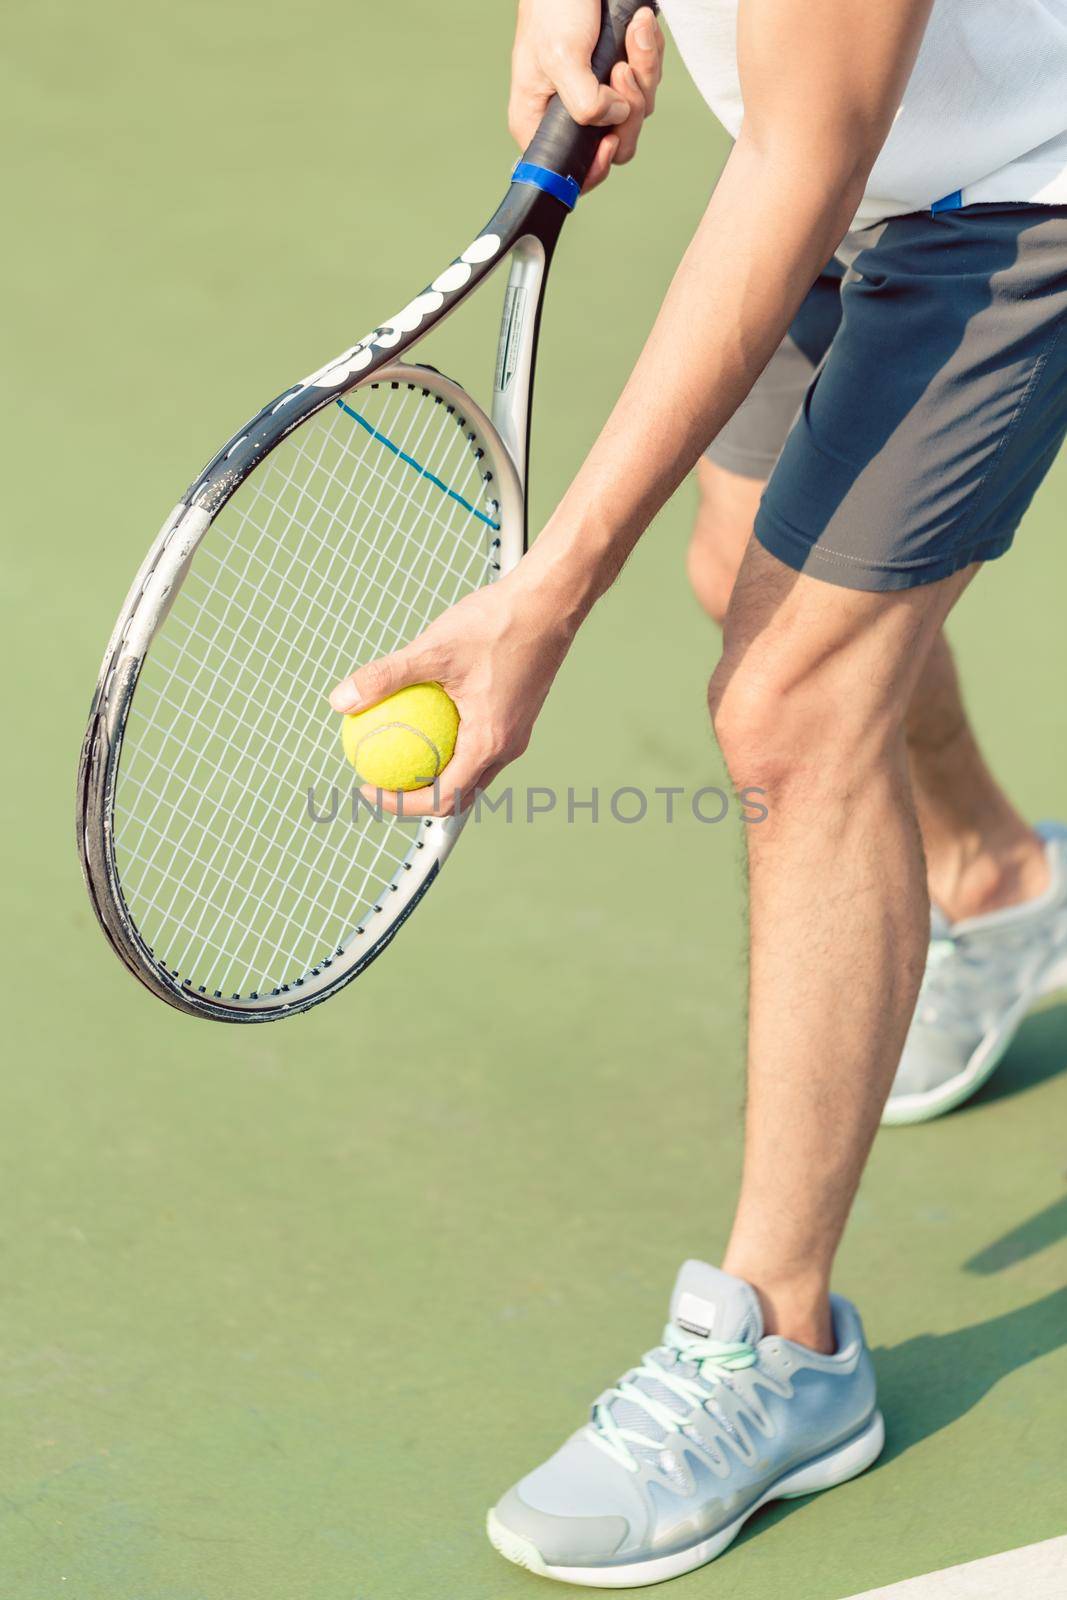 Low section of a professional player wearing gray sport shoes while holding the ball and the tennis racket during match on green surface